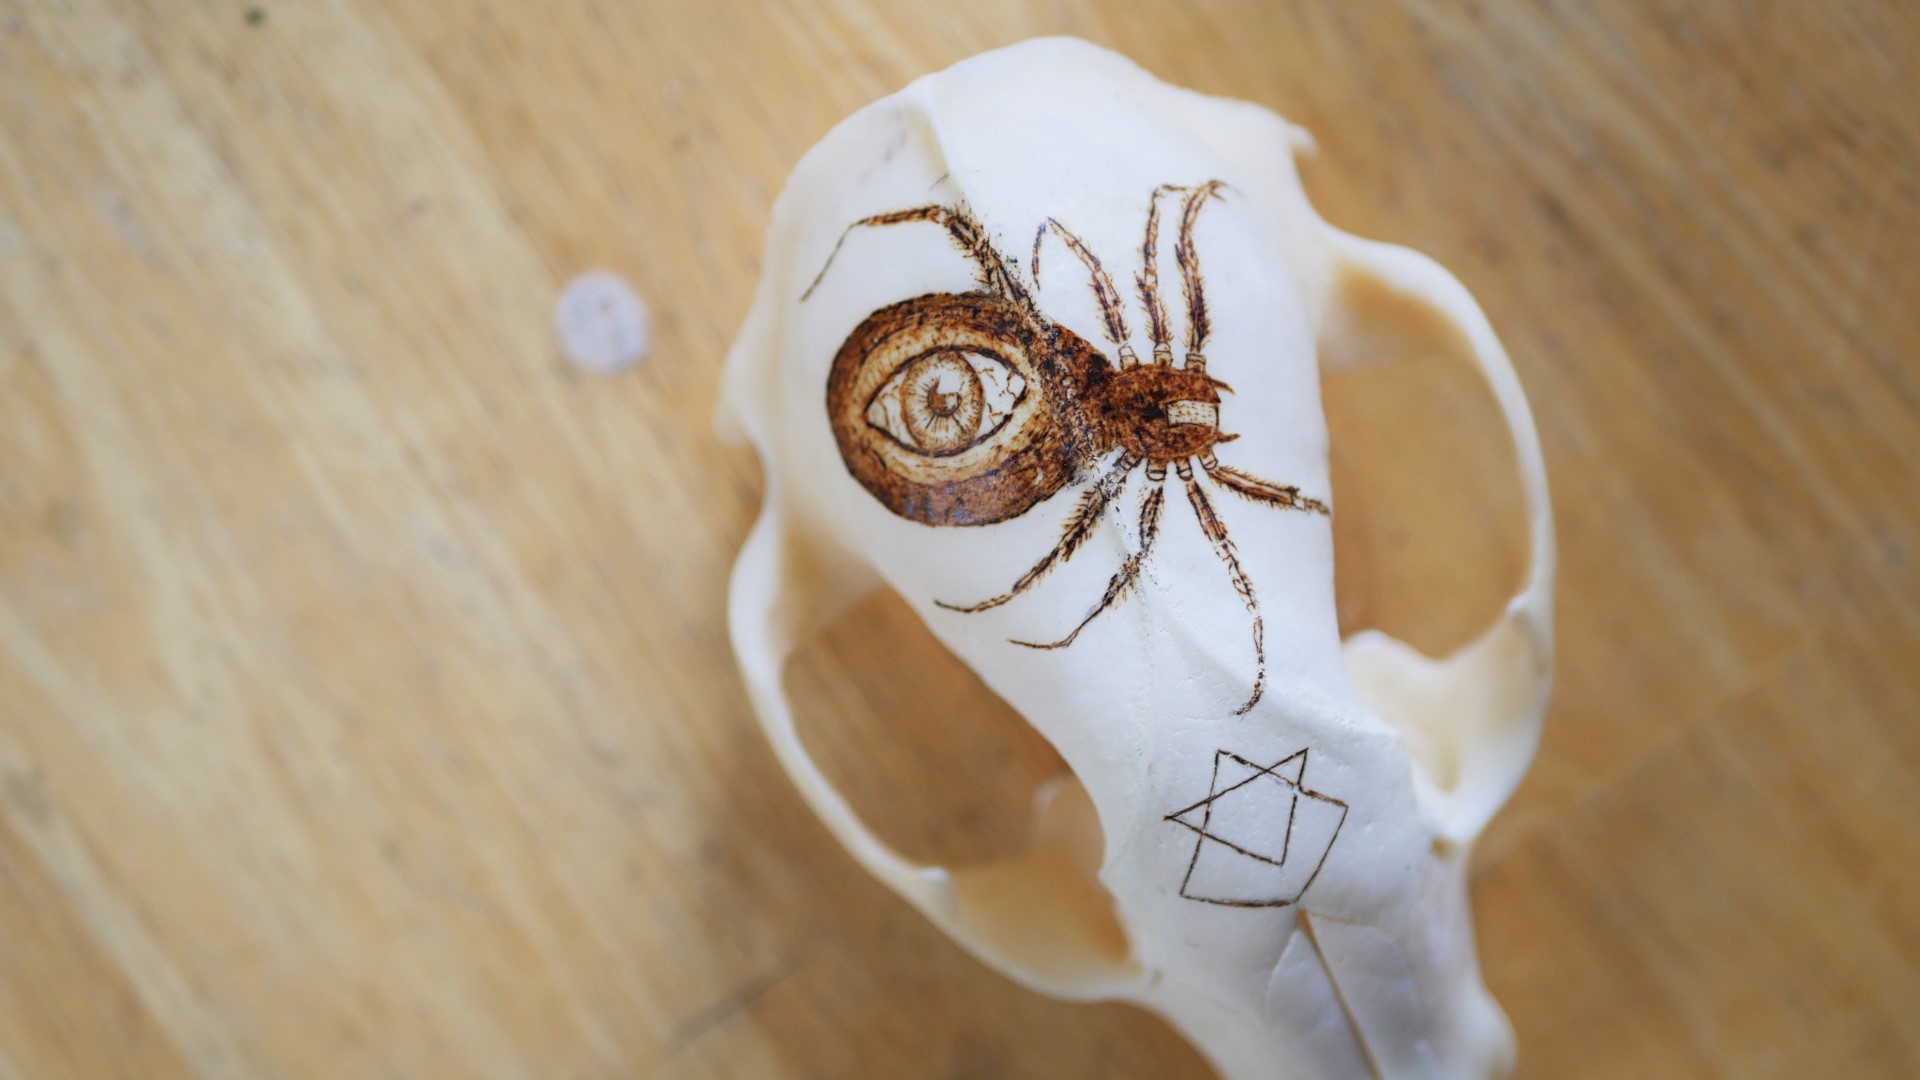 This Capitol Hill artist uses bones as her canvas 